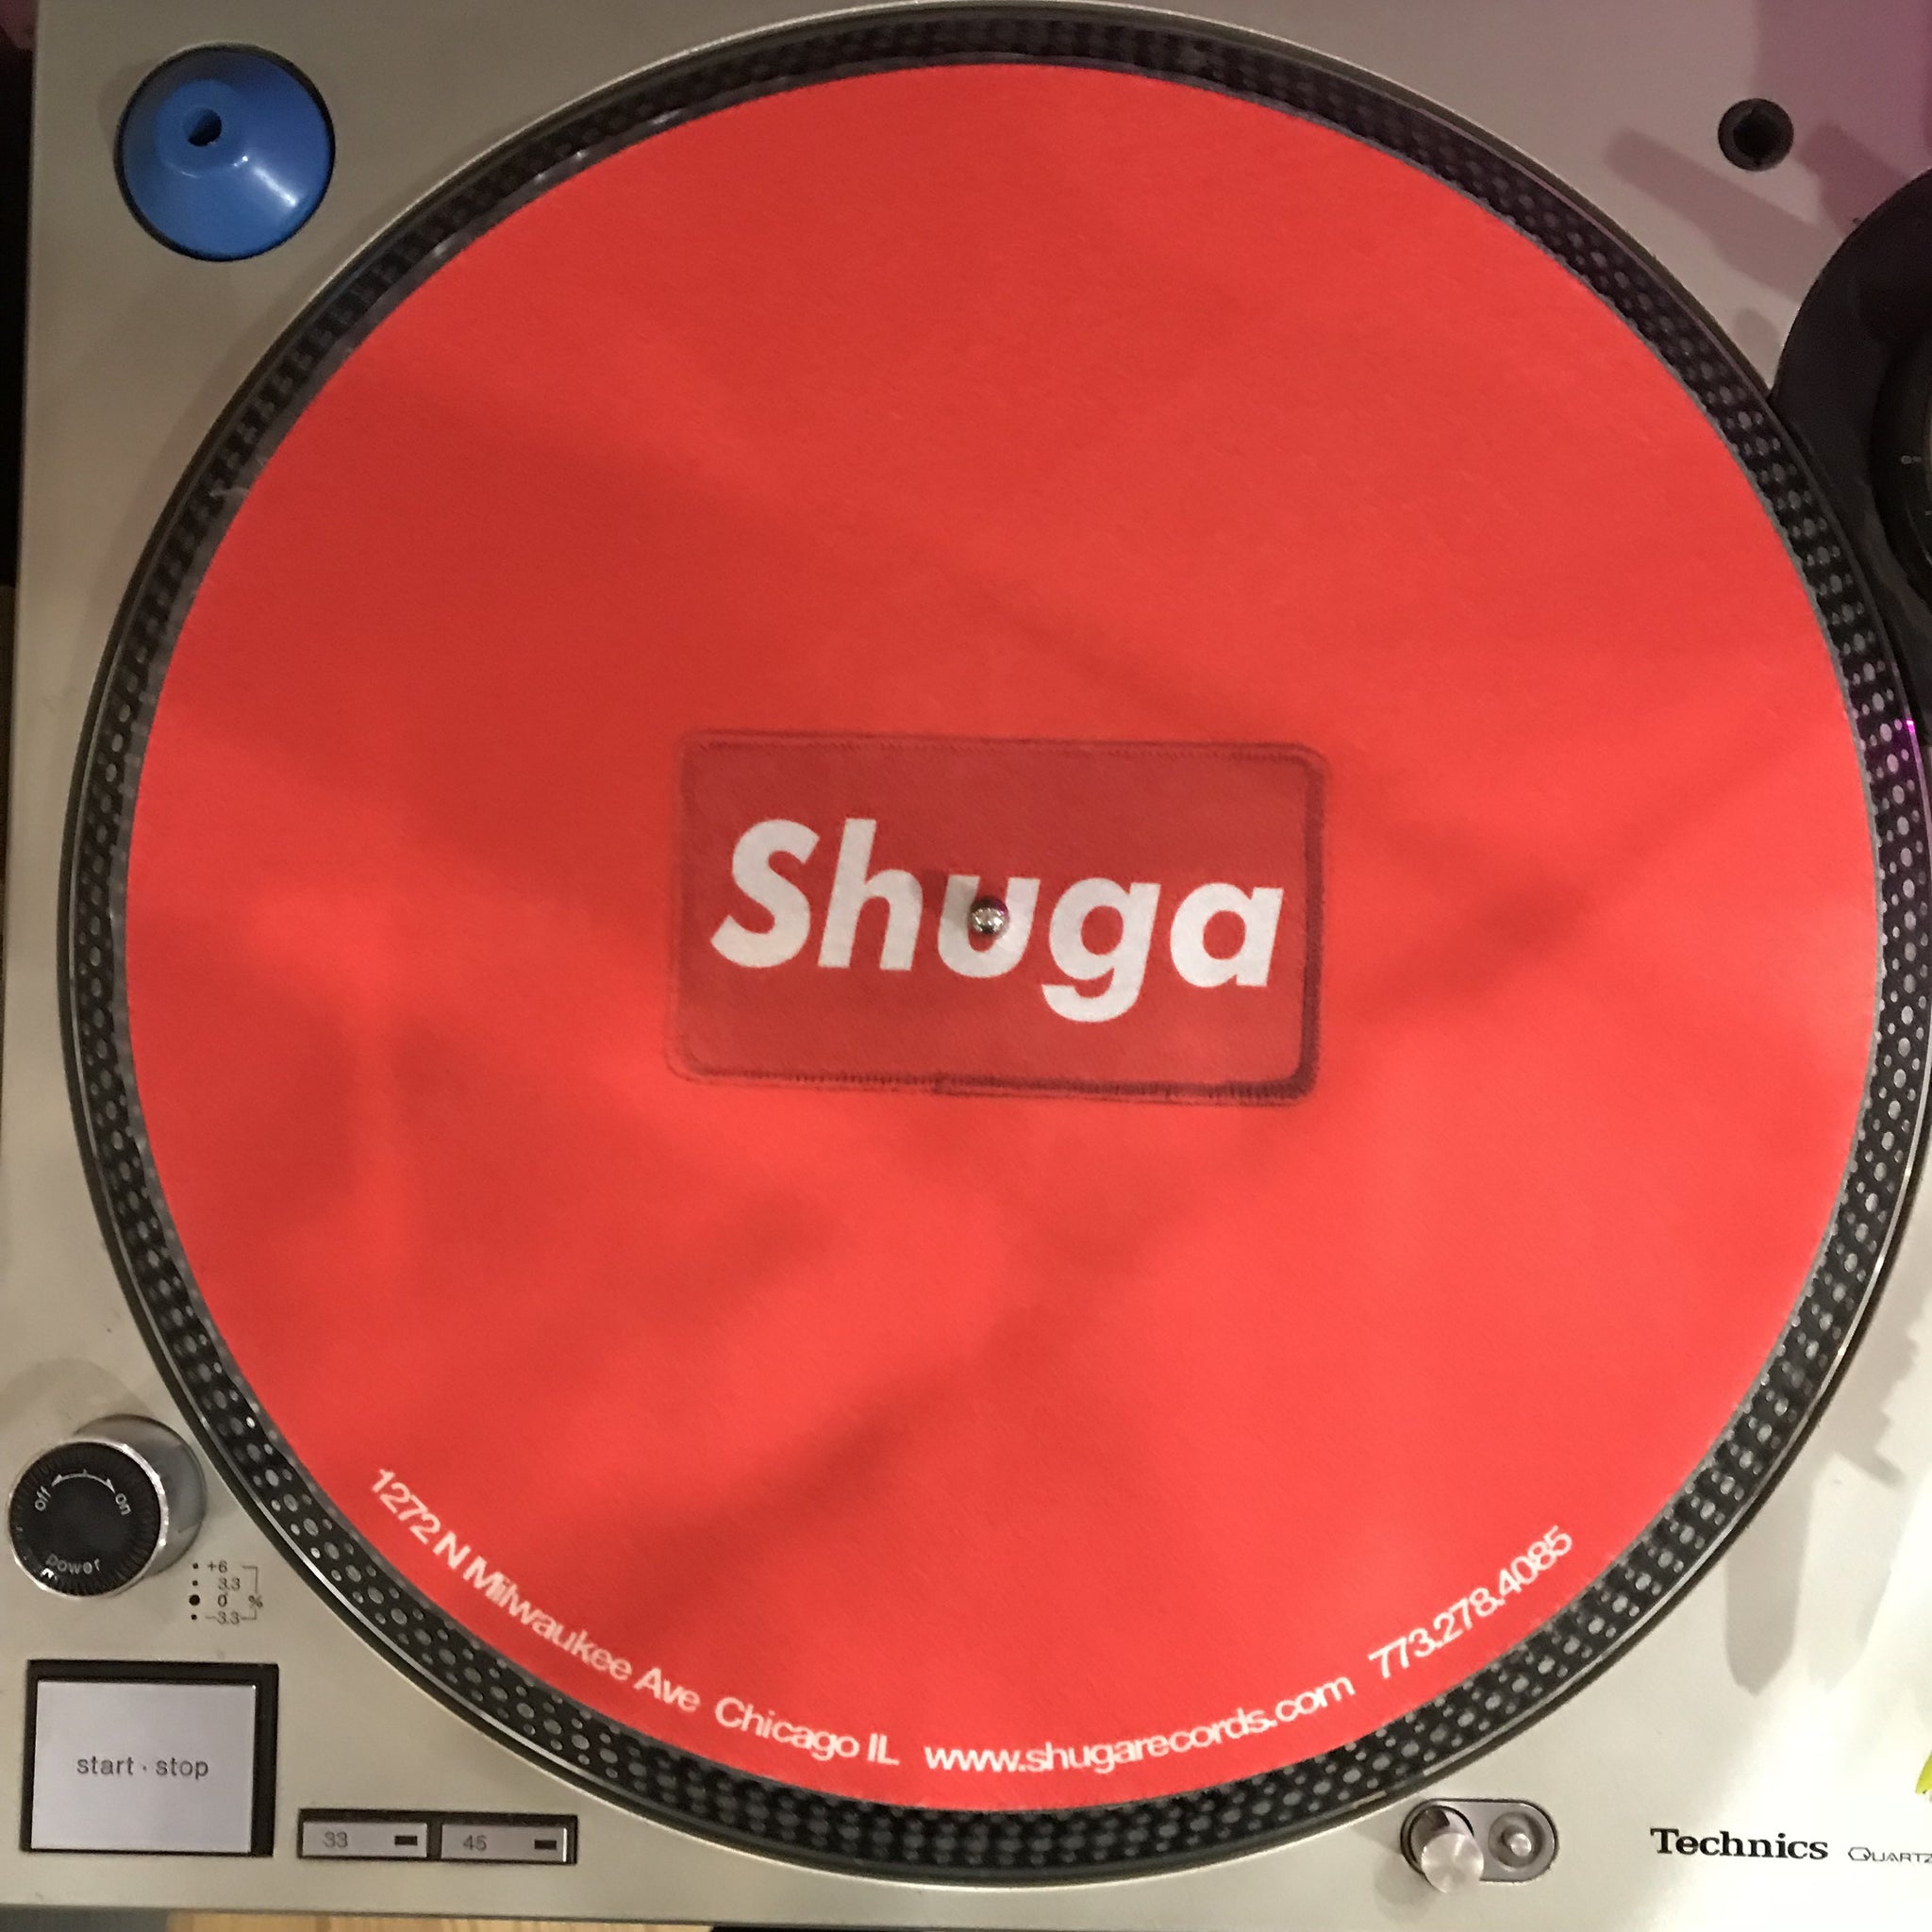 Shuga Records 2018 Limited Edition Vinyl Record Slipmat Supreme Red on Red Patch